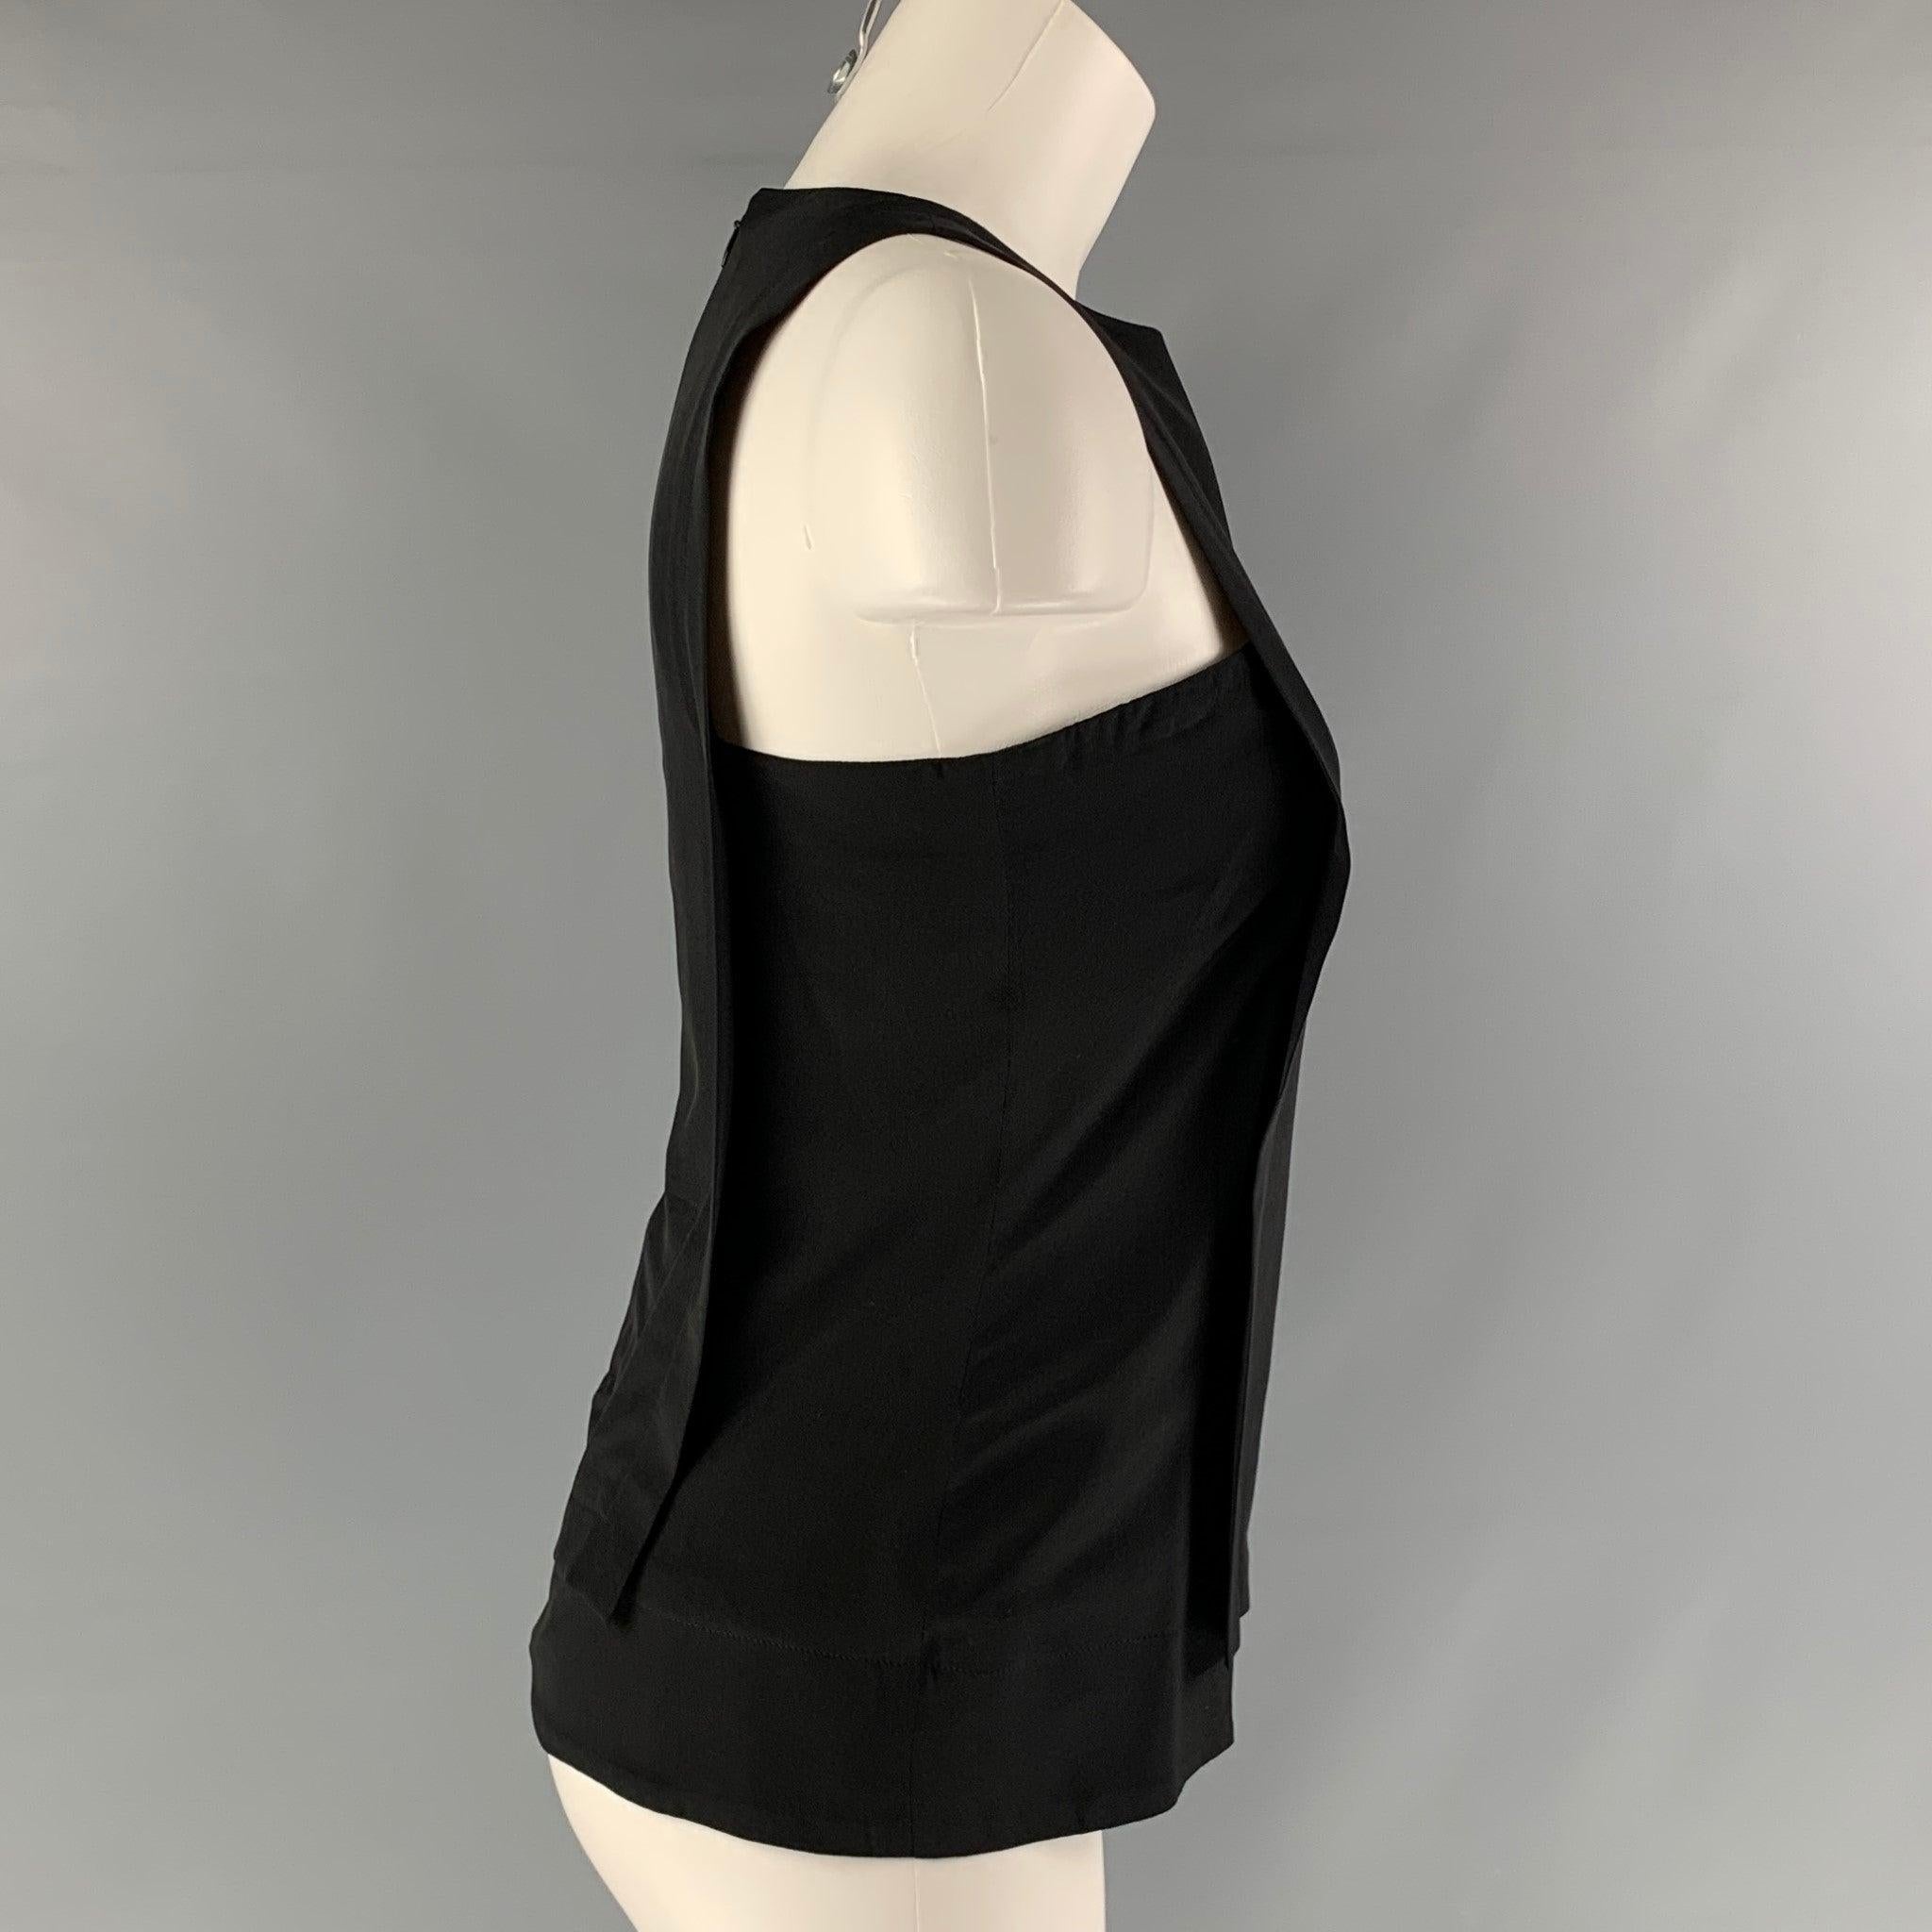 THAKOON sleeveless blouse comes in black silk fabric featuring a sleeveless style, and full zip up closure at center back.Excellent Pre-Owned Condition.  

Marked:   no size marked. 

Measurements: 
 
Shoulder: 9. 5 inches Bust: 34 inches Length: 22